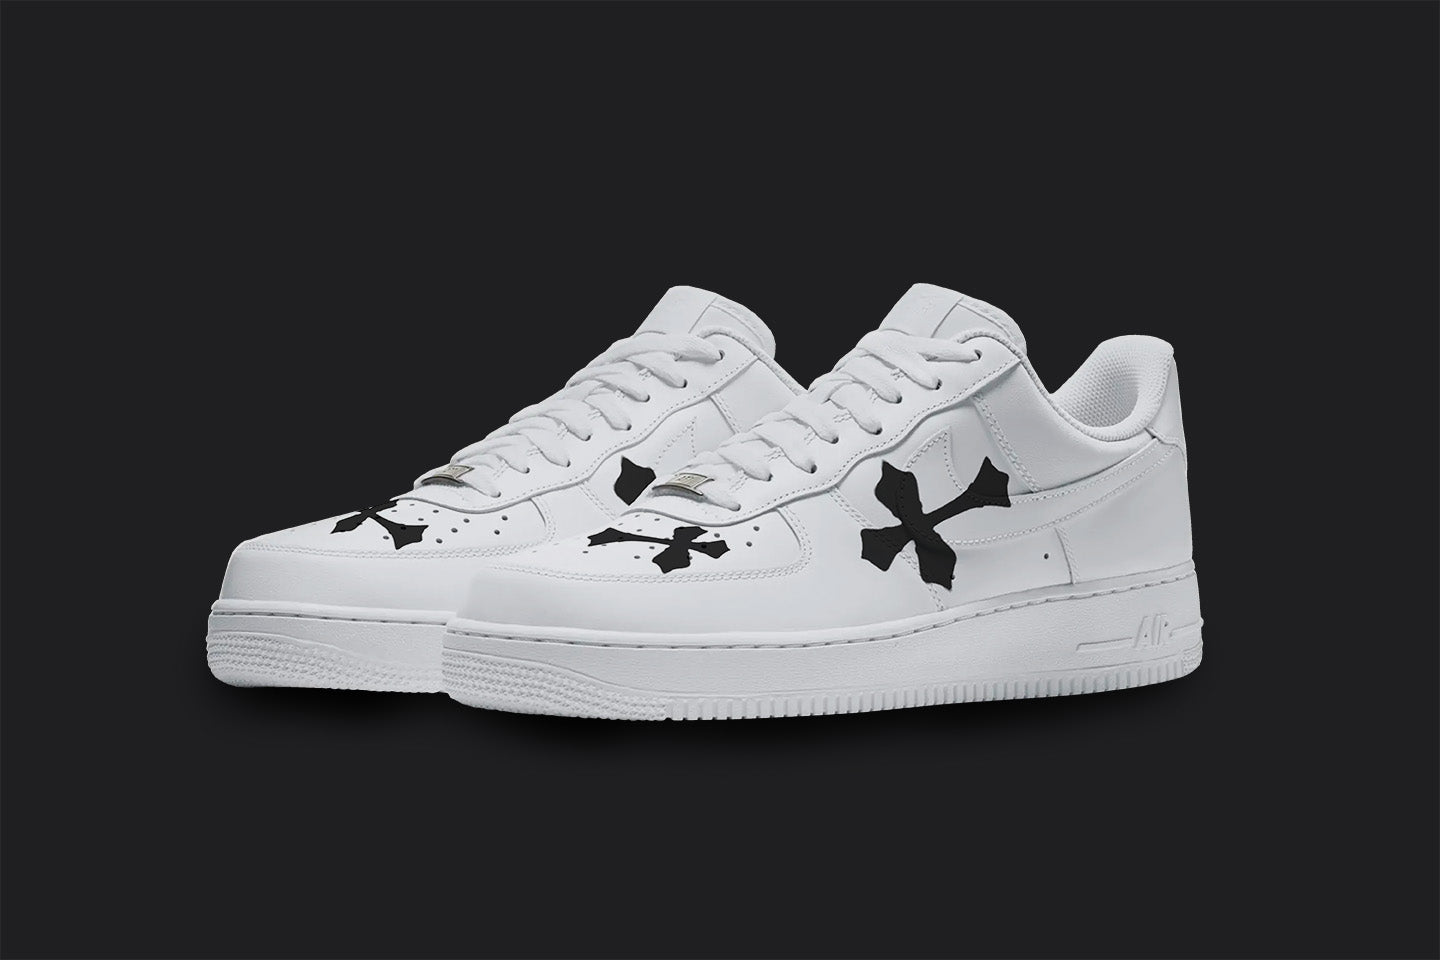 The image is of a Custom Nike Air force 1 sneakers on a blank black background. The custom sneaker pair has black crosses on different part of the white sneakers